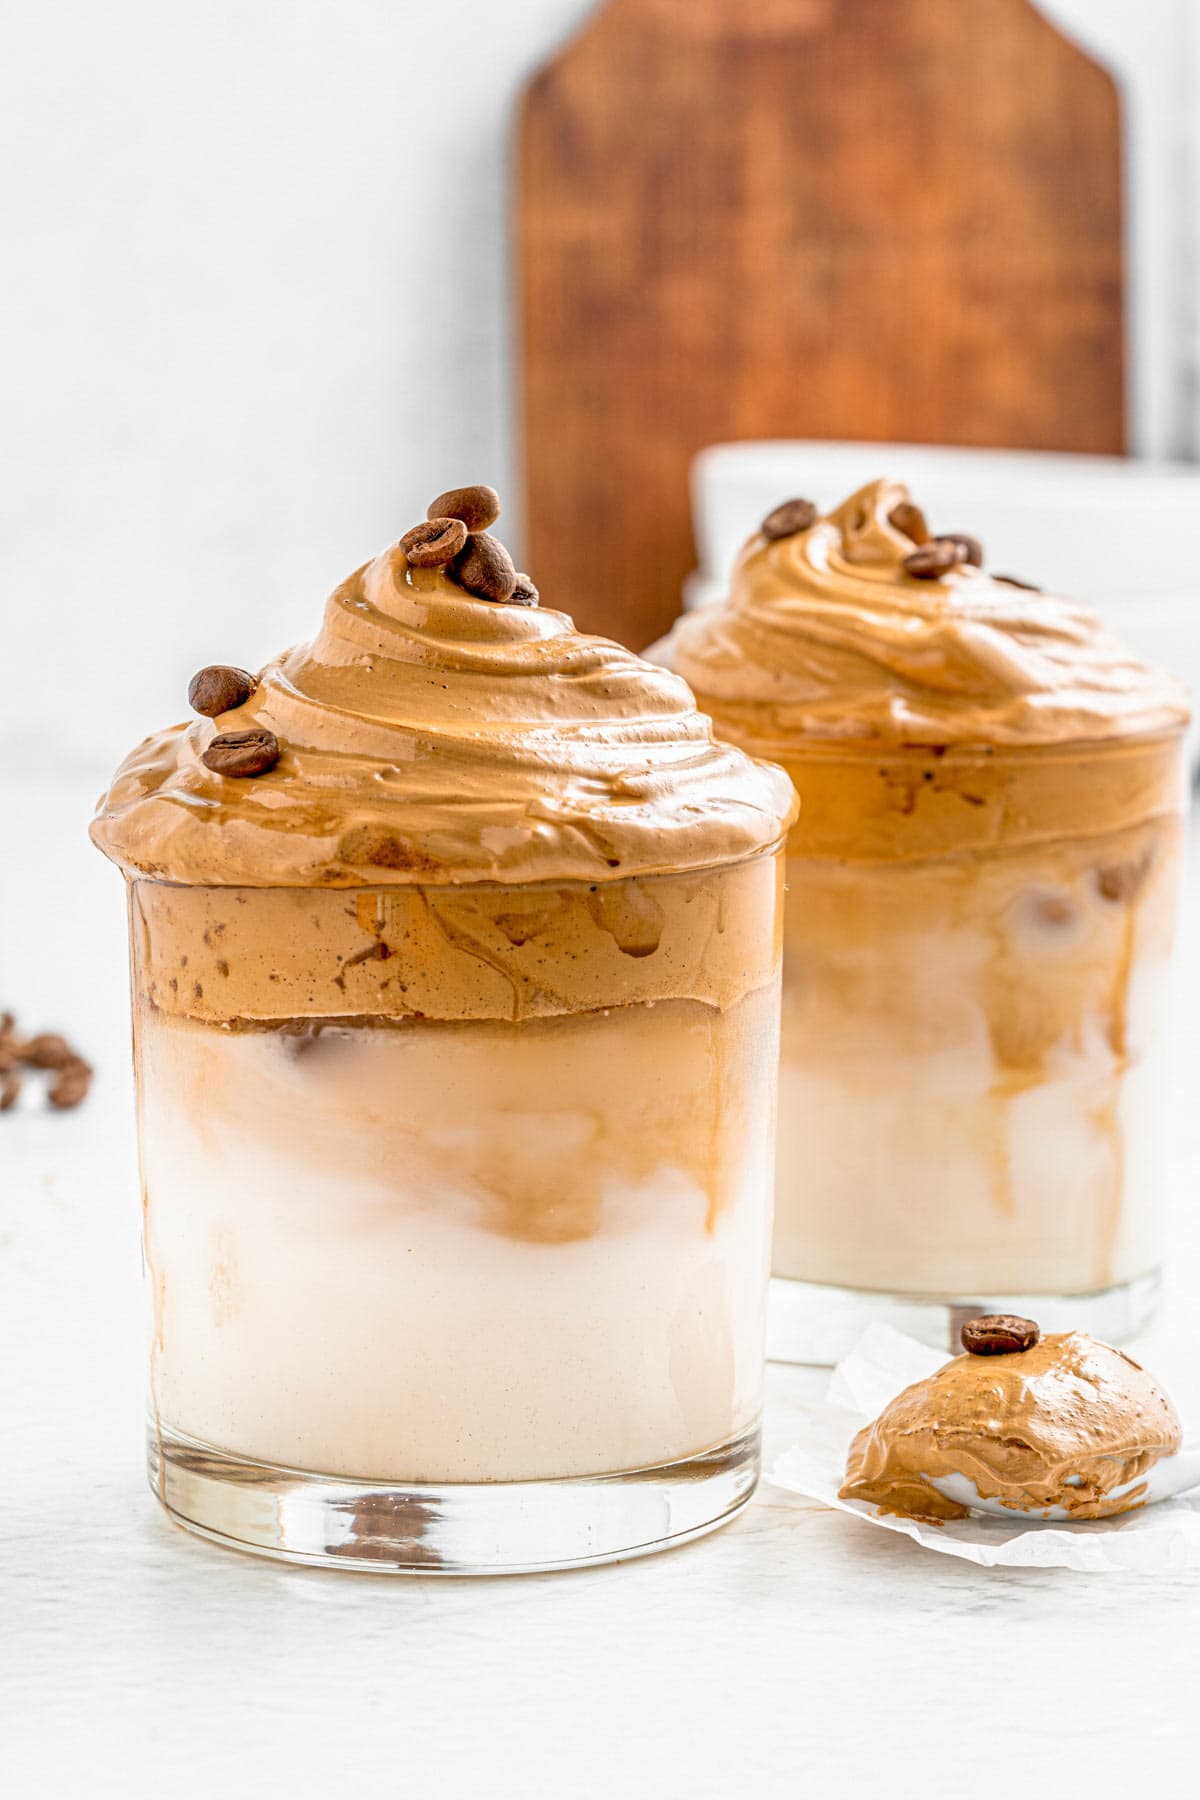 This Dalgona Whipped Iced Coffee recipe calls for four simple ingredients to make the best homemade iced coffee drink. Indulge yourself in the most delicious iced drink with fluffy clouds of whipped coffee over milk. An easy, creamy and superb refreshing drink to enjoy this summer. It only takes about 5 minutes to whip up! #whippedcoffee #dalgonacoffee #icedcoffee #frappe #icedlatte #vegan- The Yummy Bowl